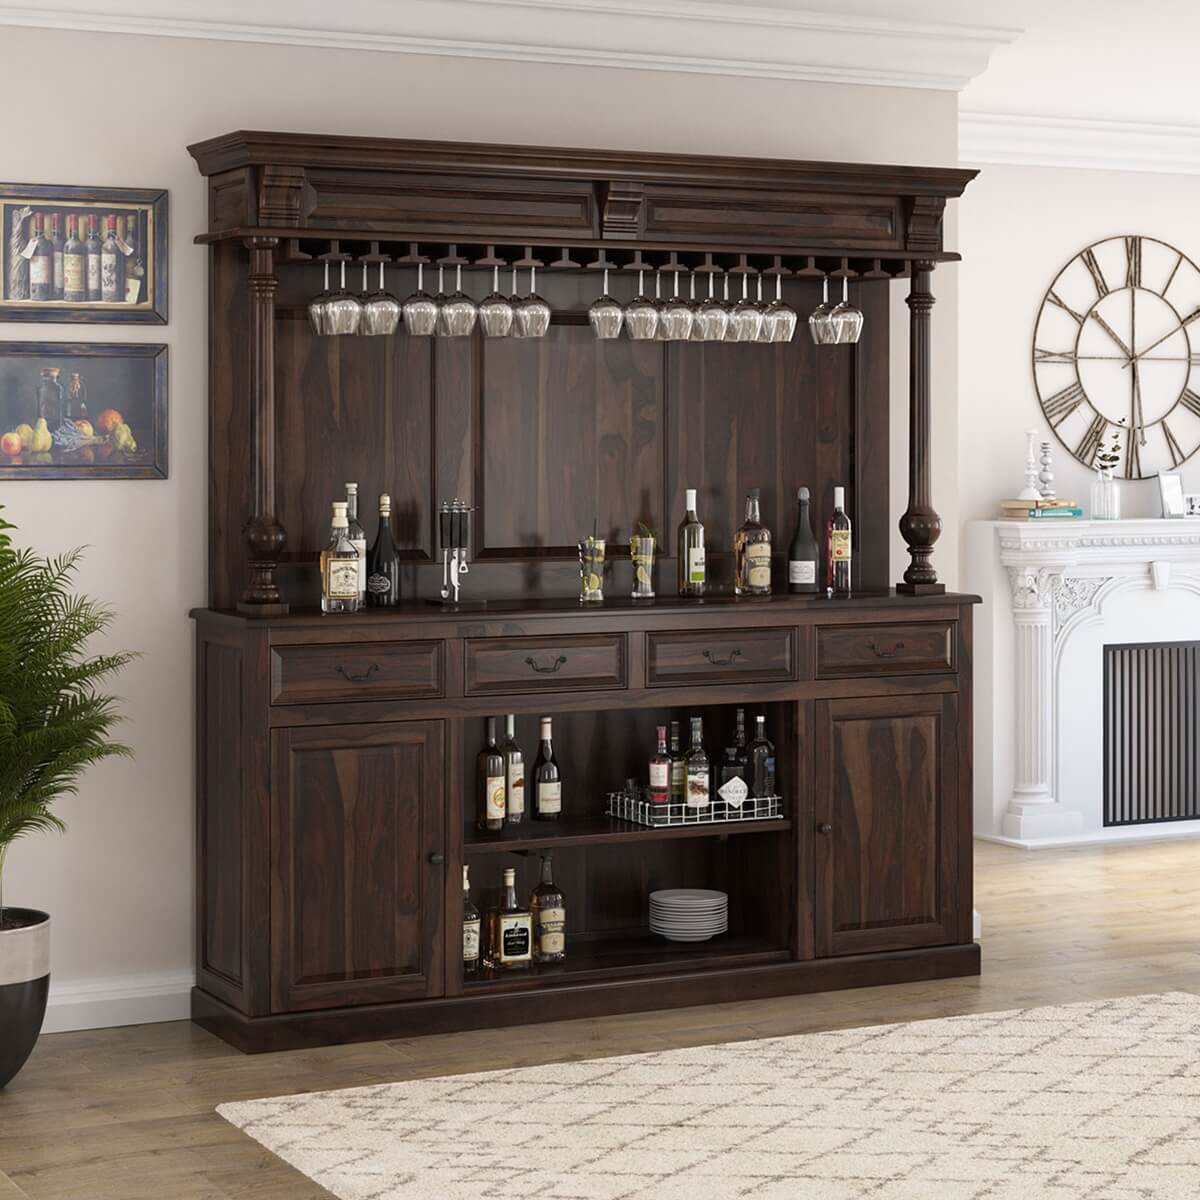 Coffee Bar Wine Bar RISE AND WINE! Cabinet Hutch Dining Room